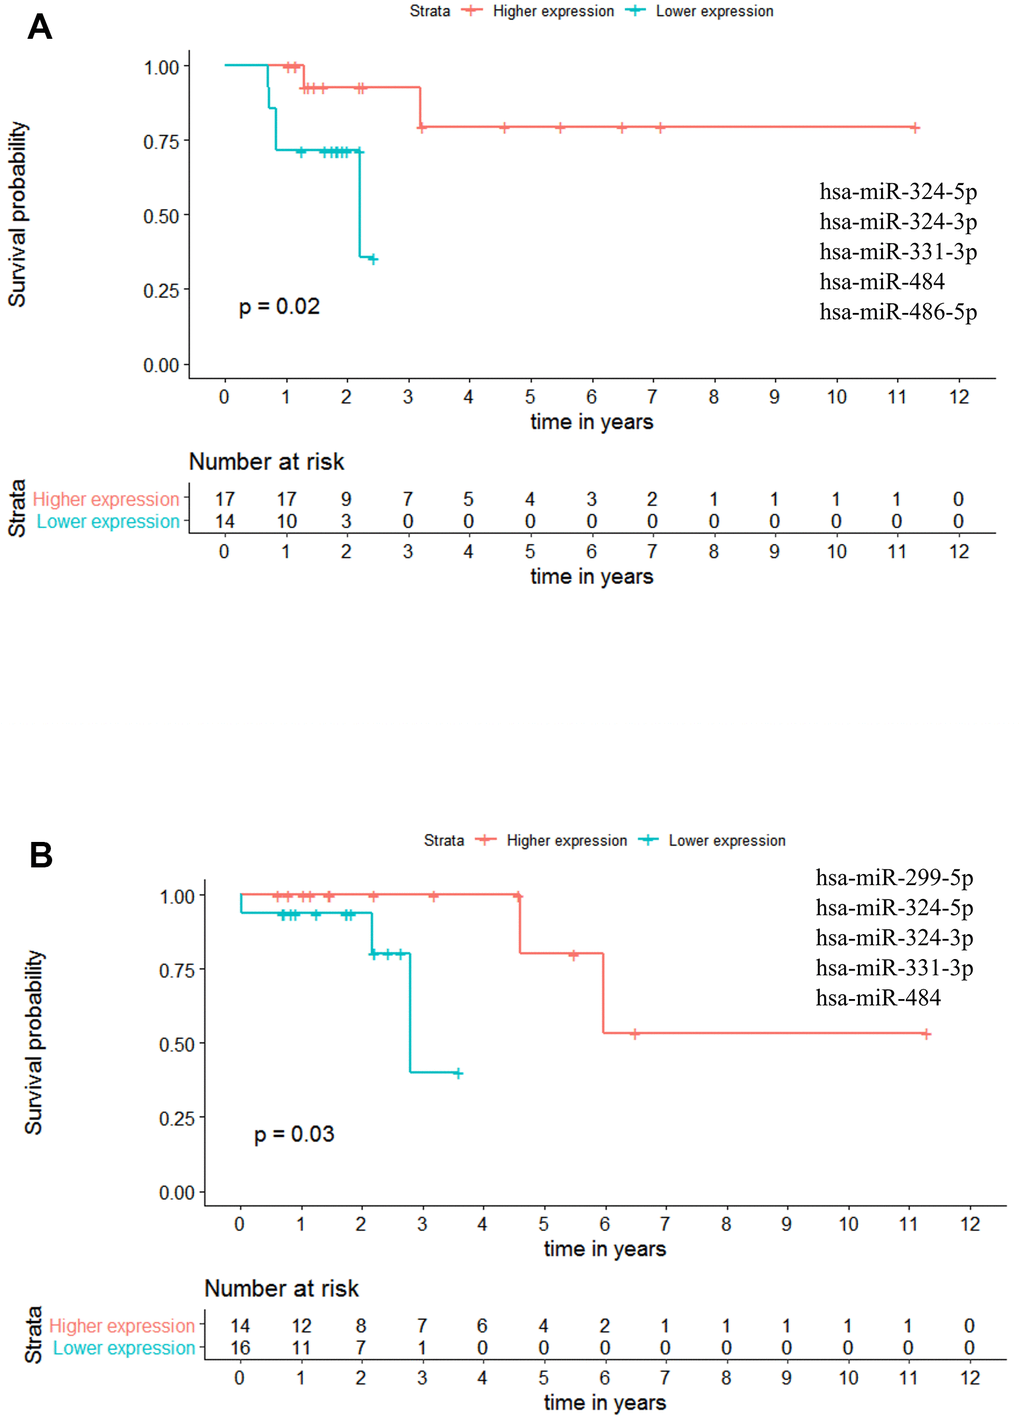 Panels of 5 miRNAs for overall survival (OS) and recurrence free survival (RFS) prognosis of stage III patients. (A) Stage III OS Kaplan-Meier curve based on miR-324-5p - miR-324-3p - miR-331-3p - miR-484 - miR-486-5p (p-value = 0.020, Log rank test; HR= 8.15). (B) Stage III recurrence free survival RFS Kaplan-Meier curve based on miR-299-5p - miR-324-5p - miR-324-3p - miR-331-3p - miR-484 (p = 0.030, Log rank test). Time is represented in years. Higher (in red) and Lower (in blue) expression groups represent the group of patients with miRNA expression above and below miRNAs median expression, respectively. Censored data is represented by small plus signs in each group. The number of patients at risk for each group and per time point is shown in the table below each graph. HR, hazard ratio.